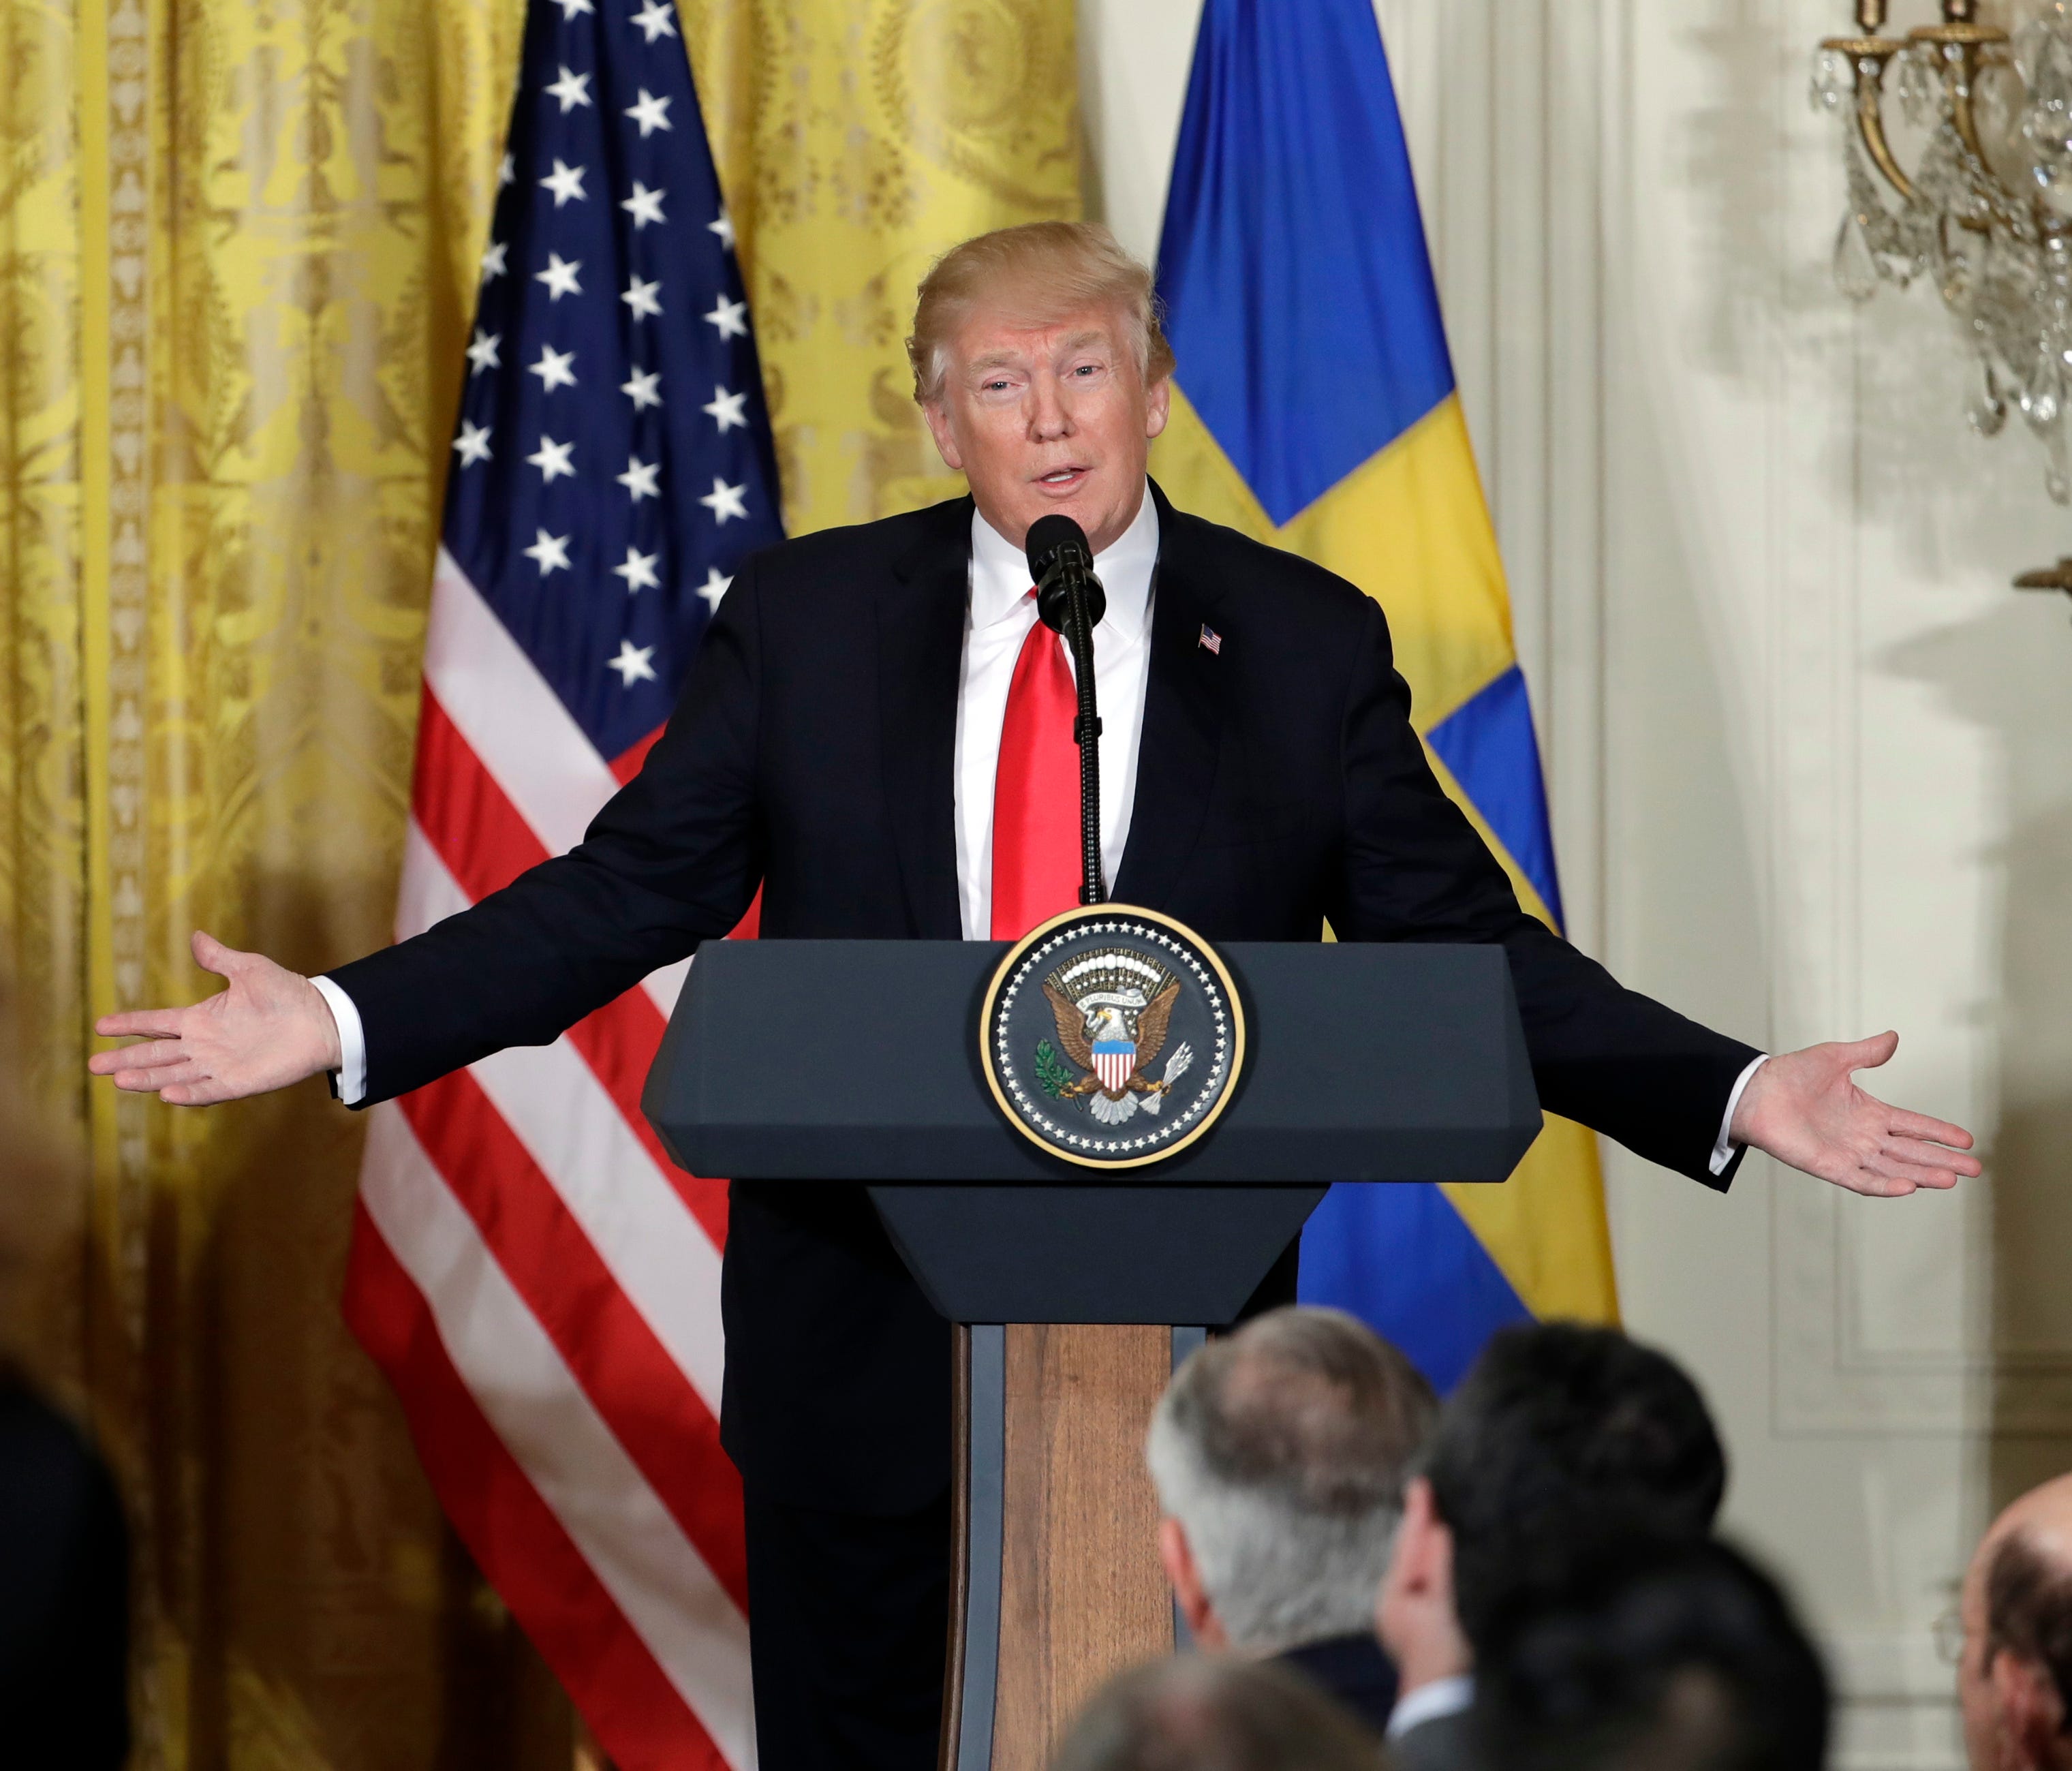 President Trump speaks during a news conference with Swedish Prime Minister Stefan Lofven in the East Room of the White House Tuesday.